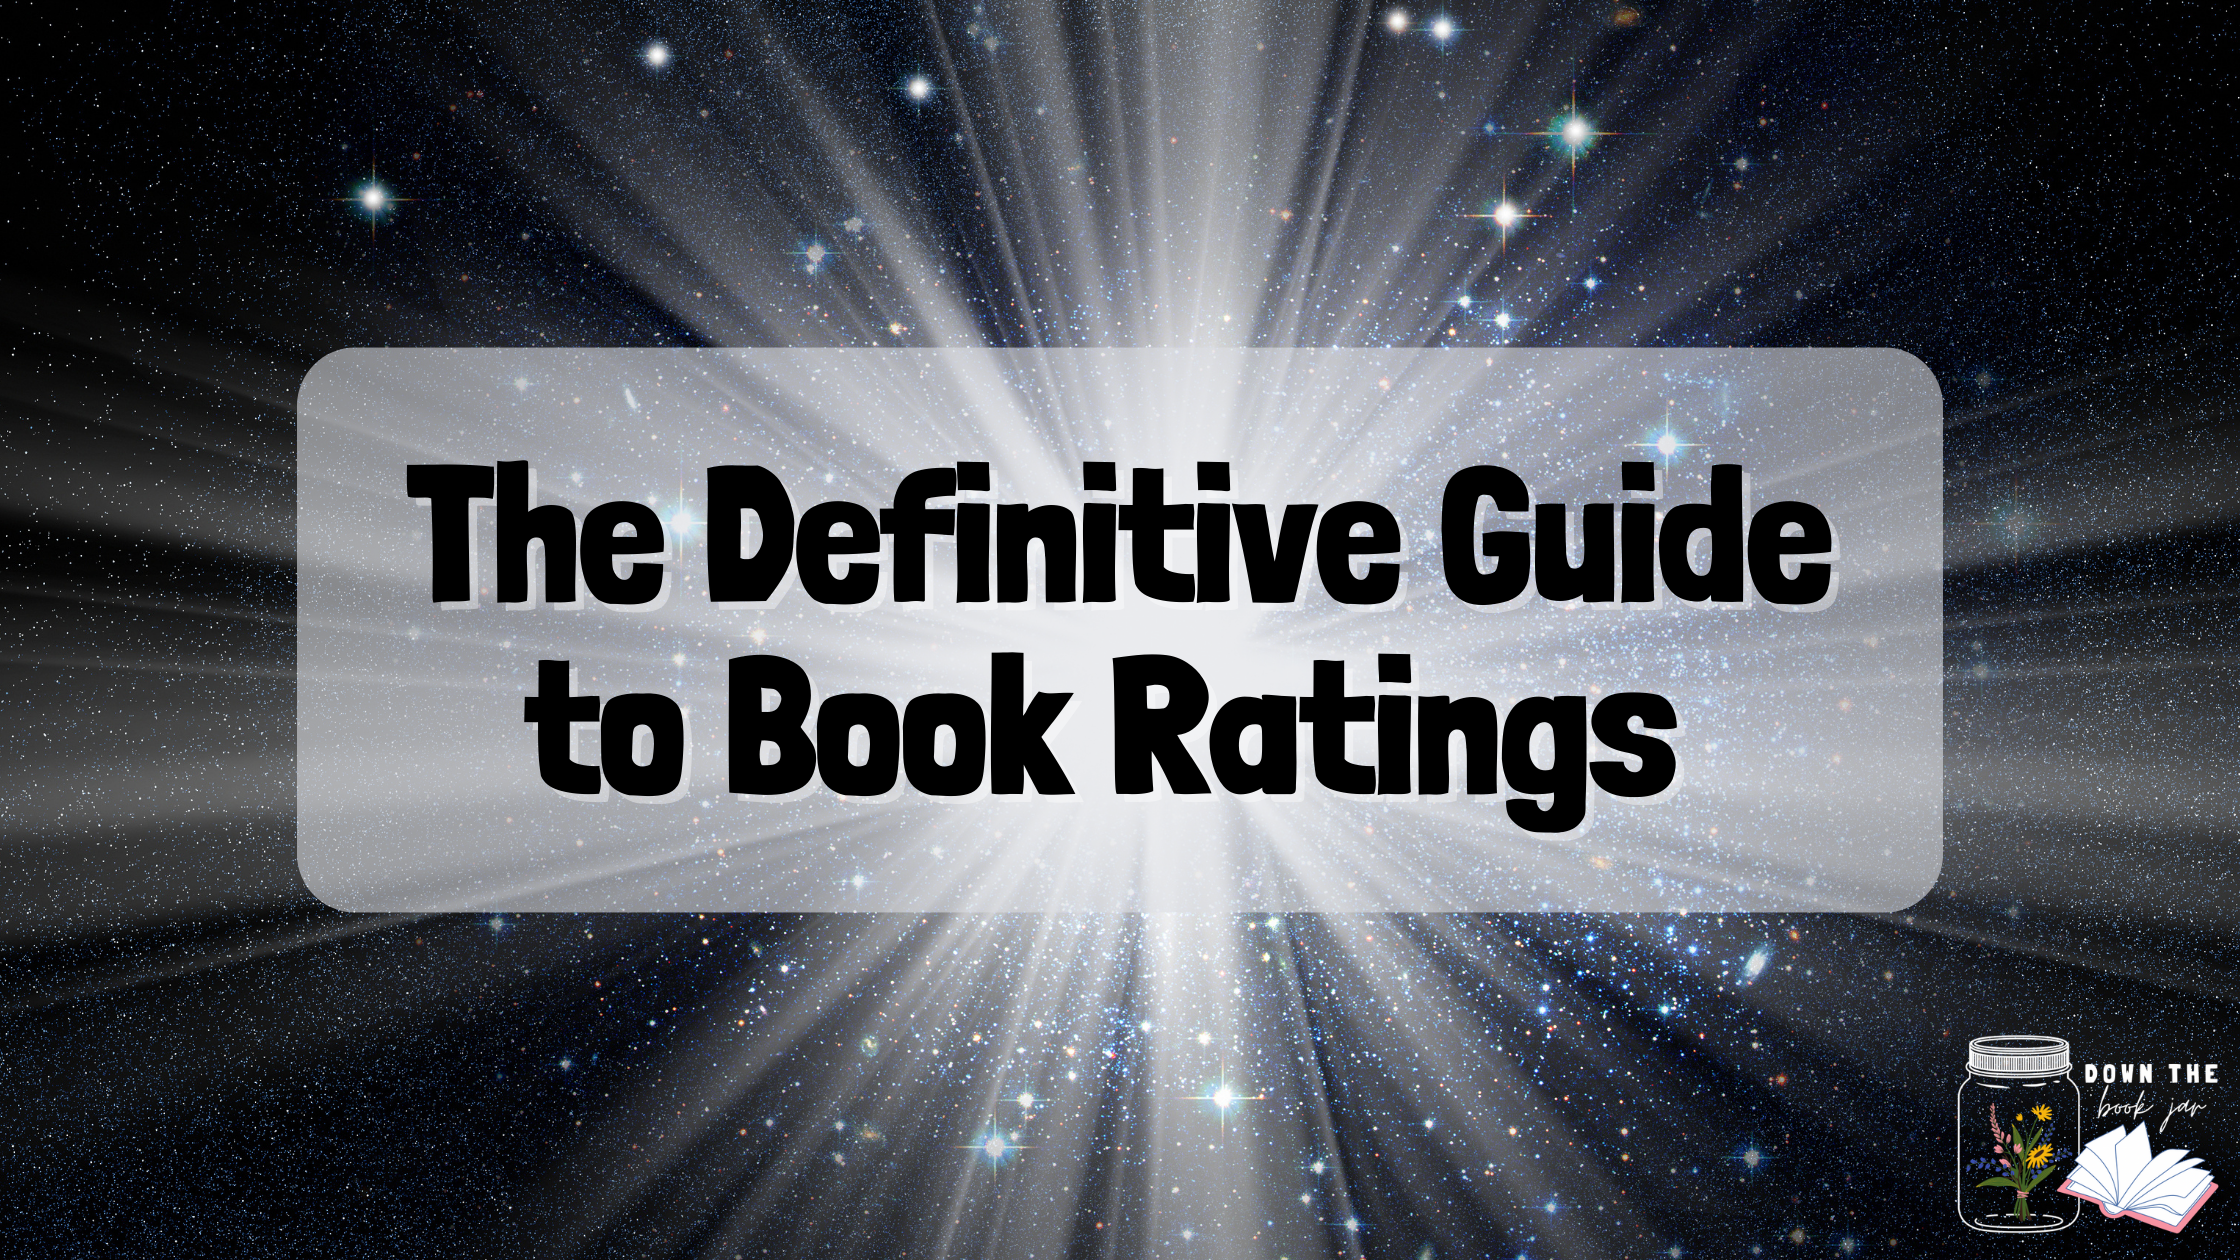 The Definitive Guide to Book Ratings